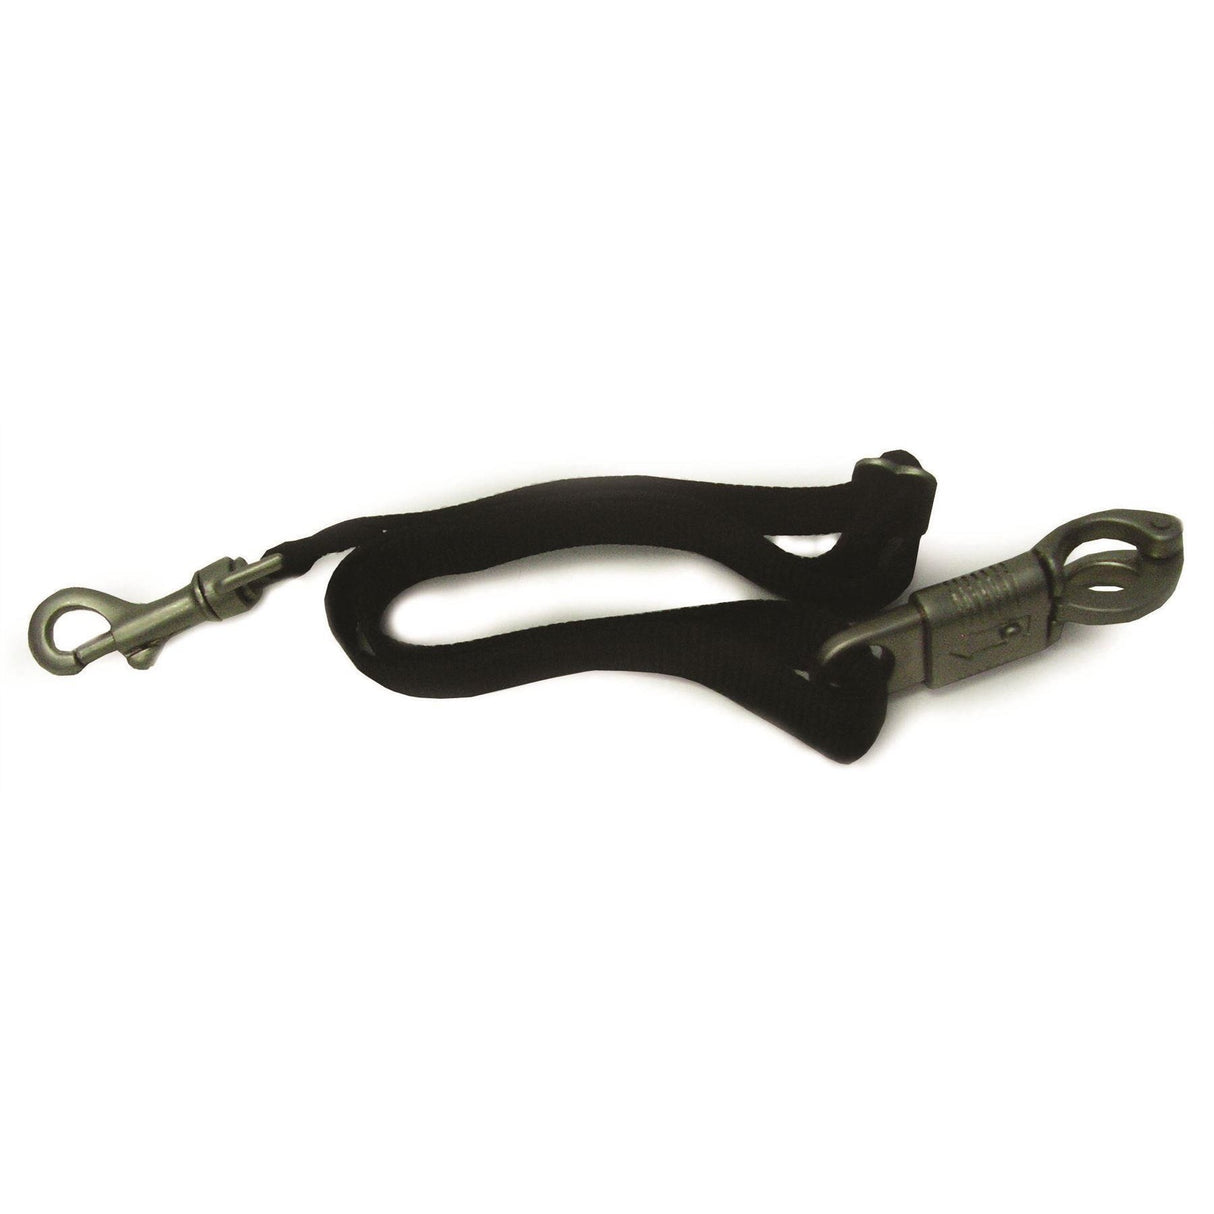 Hy Trailer Tie with Panic Hook